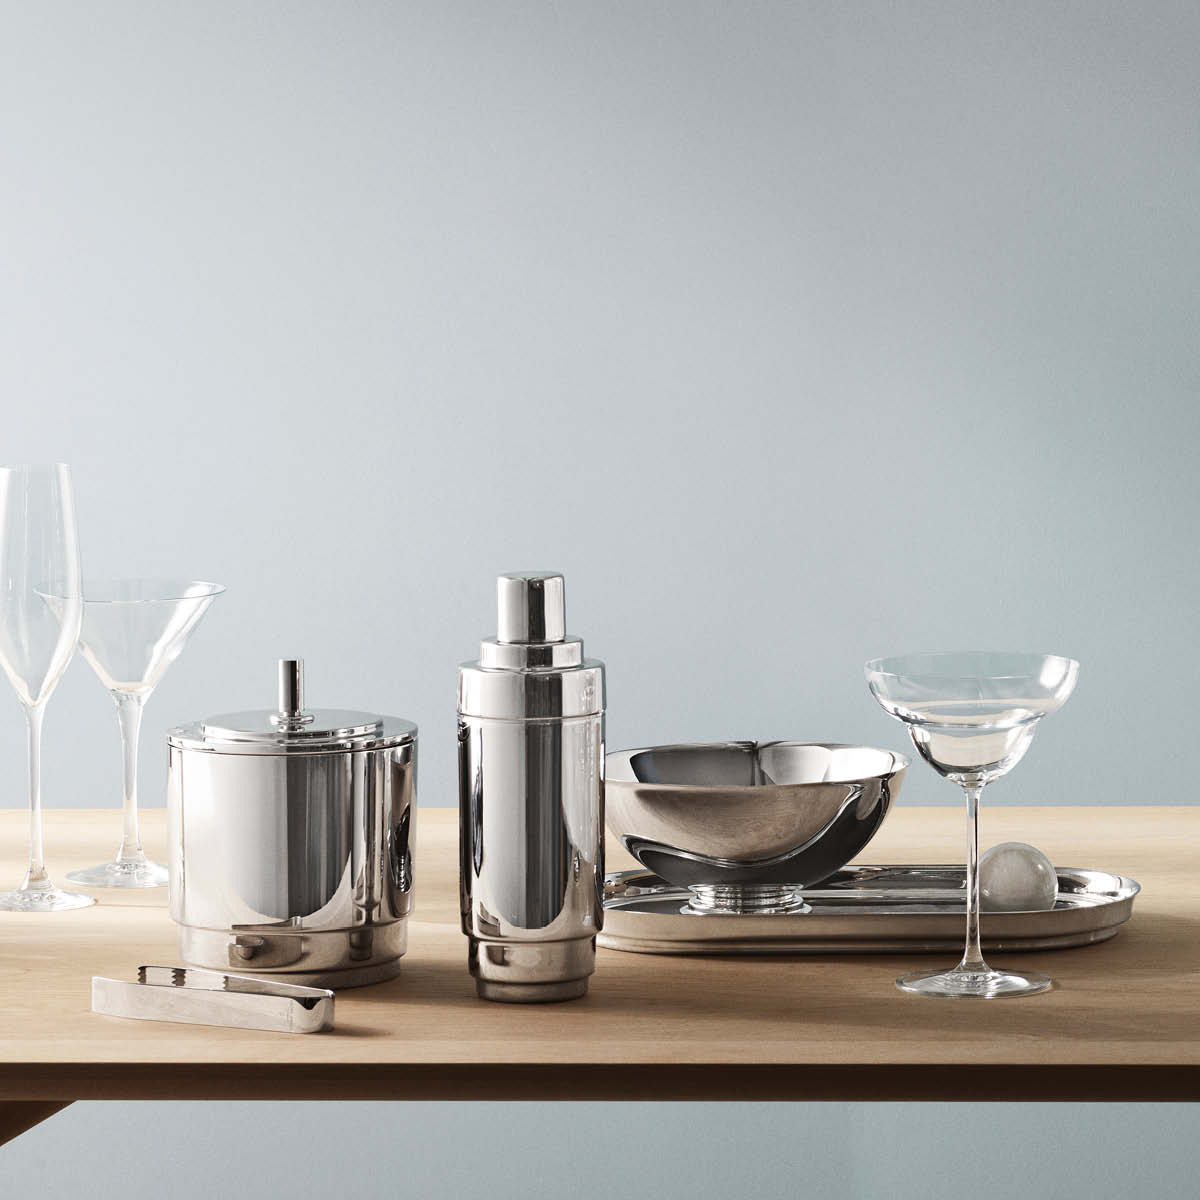 https://res.cloudinary.com/georgjensen/image/upload/f_auto,dpr_2/w_auto,c_scale/products/images/hi-res/3586086_1200x1200?_i=AG